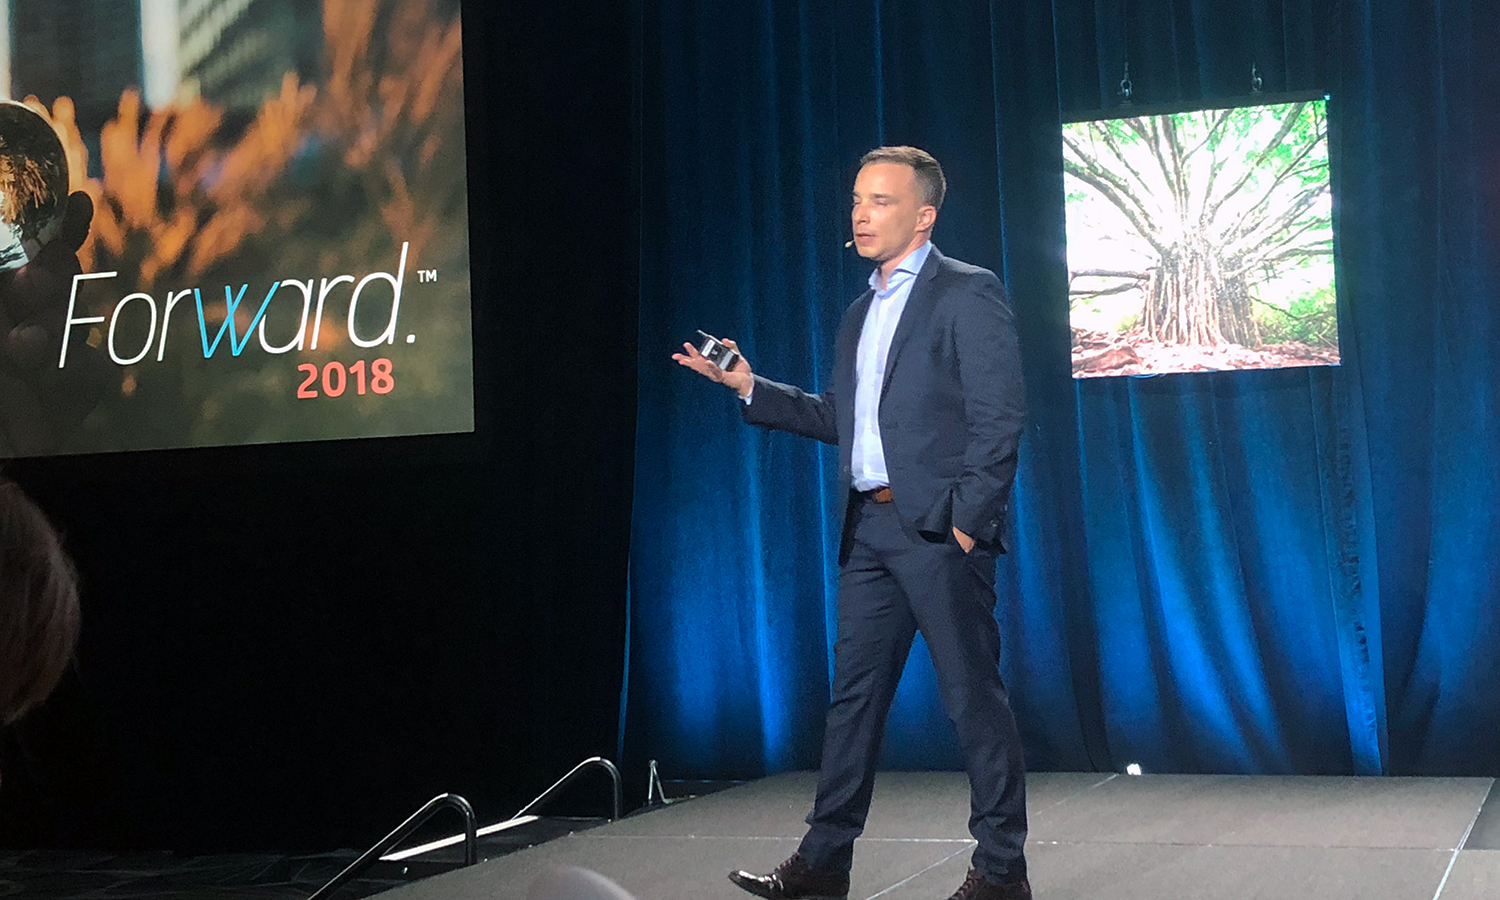 Tom Gerace delivers the opening keynote at Forward 2018